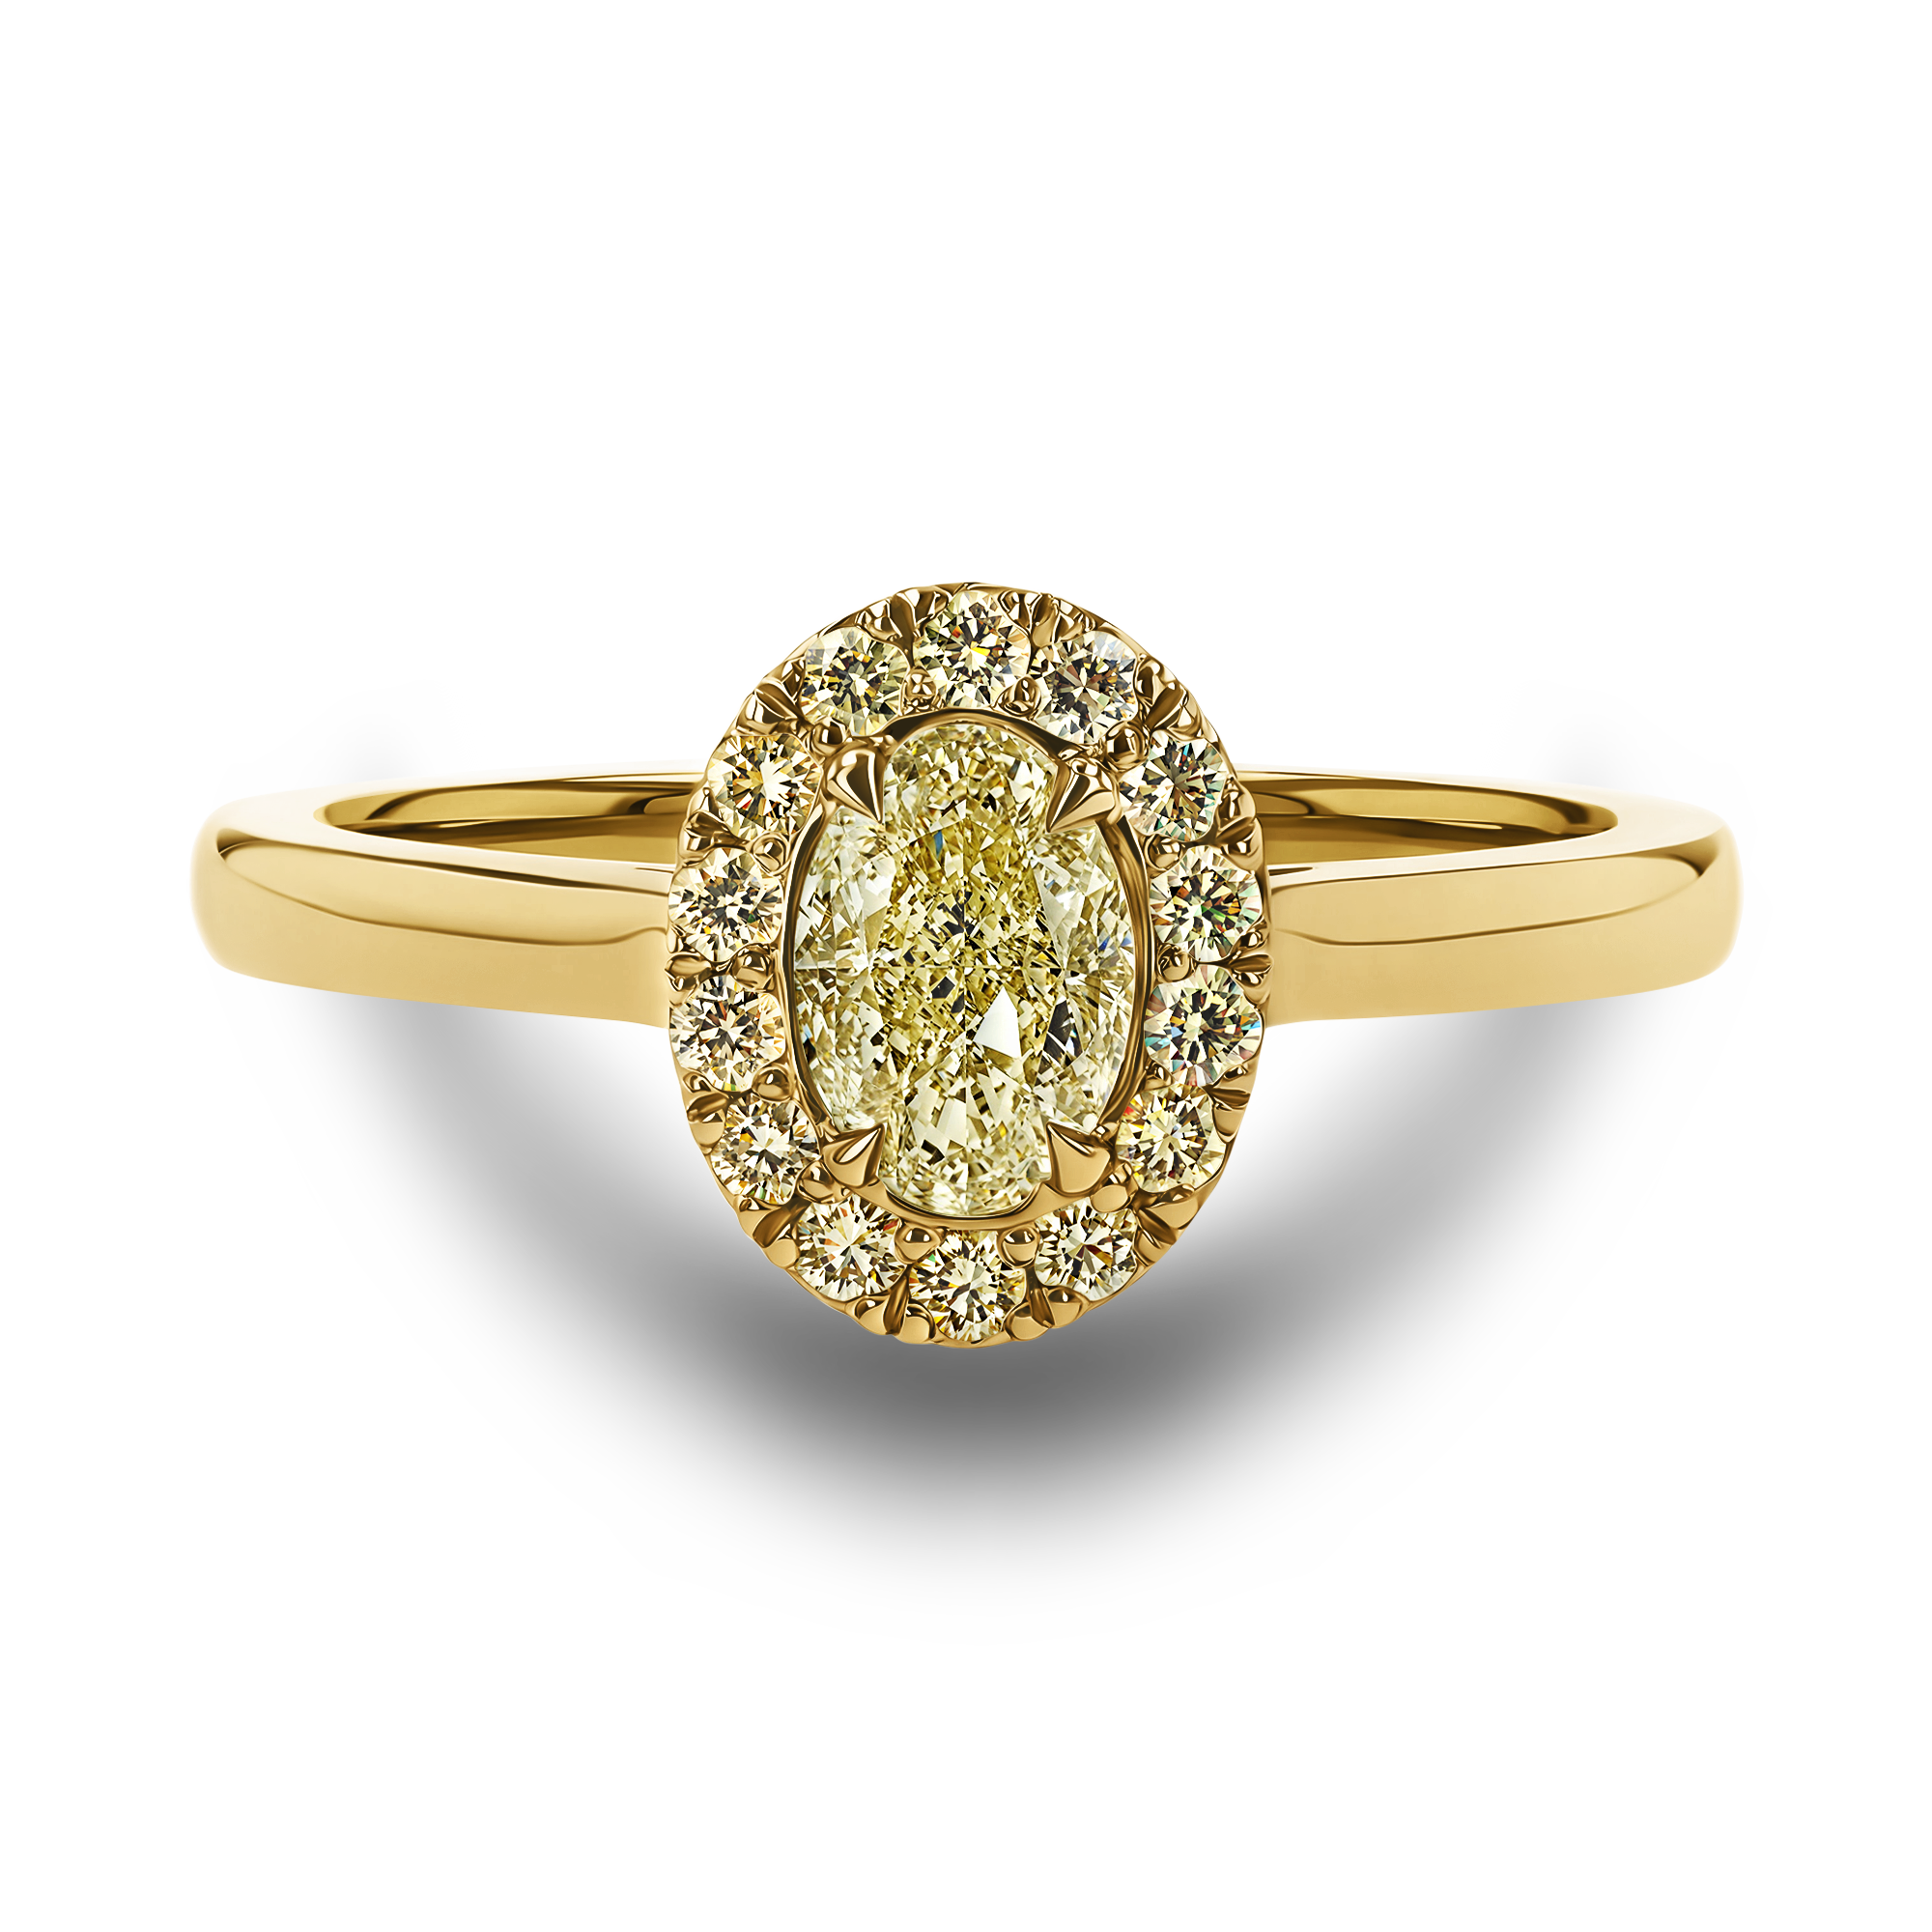 Celestial 0.72ct Fancy Yellow Diamond Cluster Ring Oval Cut, Claw Set_2